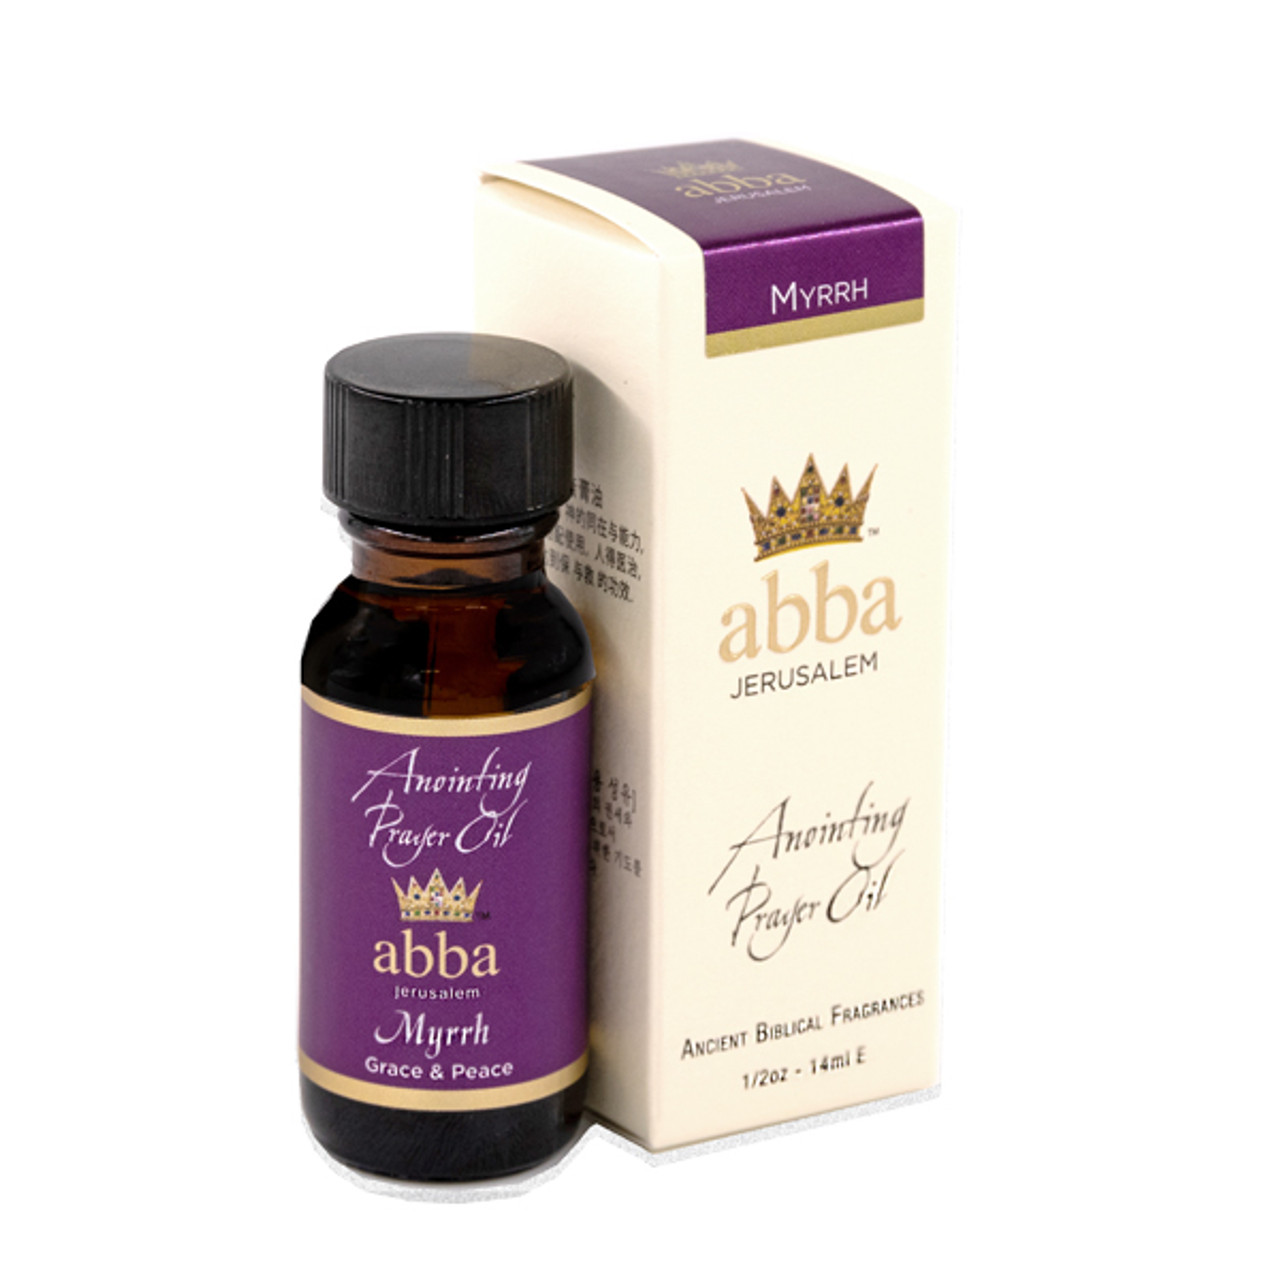 Anointing oil - Frankincense and Myrrh - Holy Land Shopping